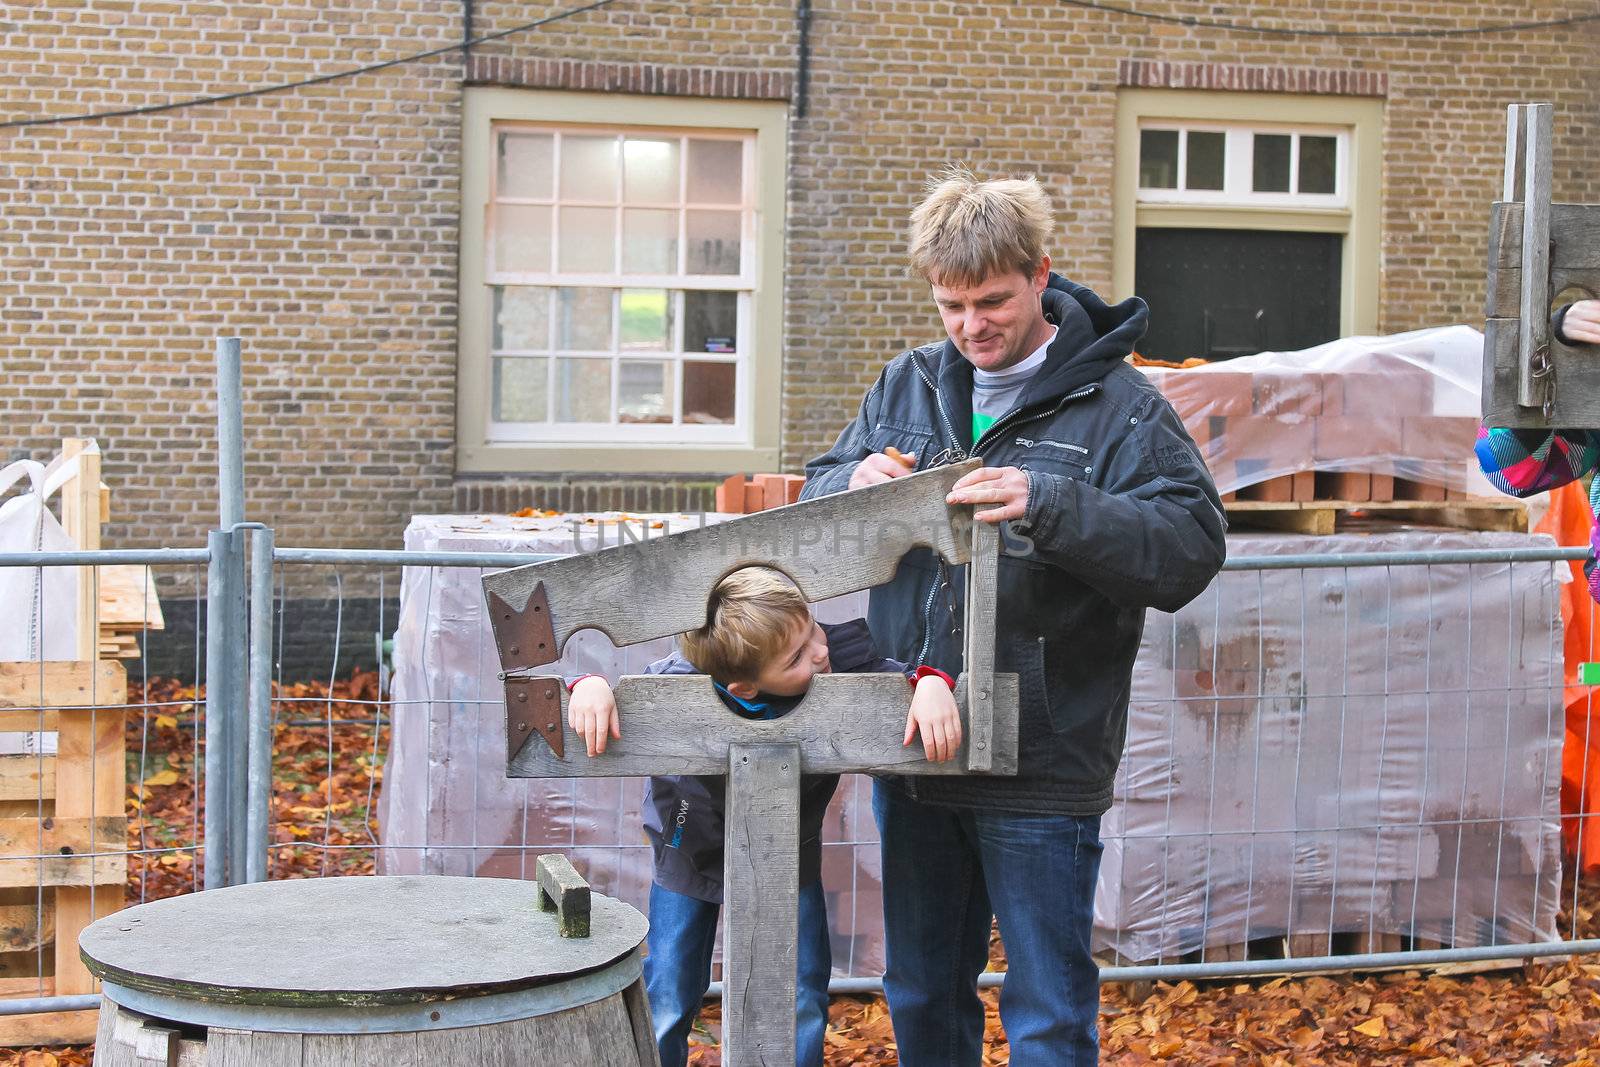 Father shows his son device pillory in the Dutch suburb. Netherl by NickNick